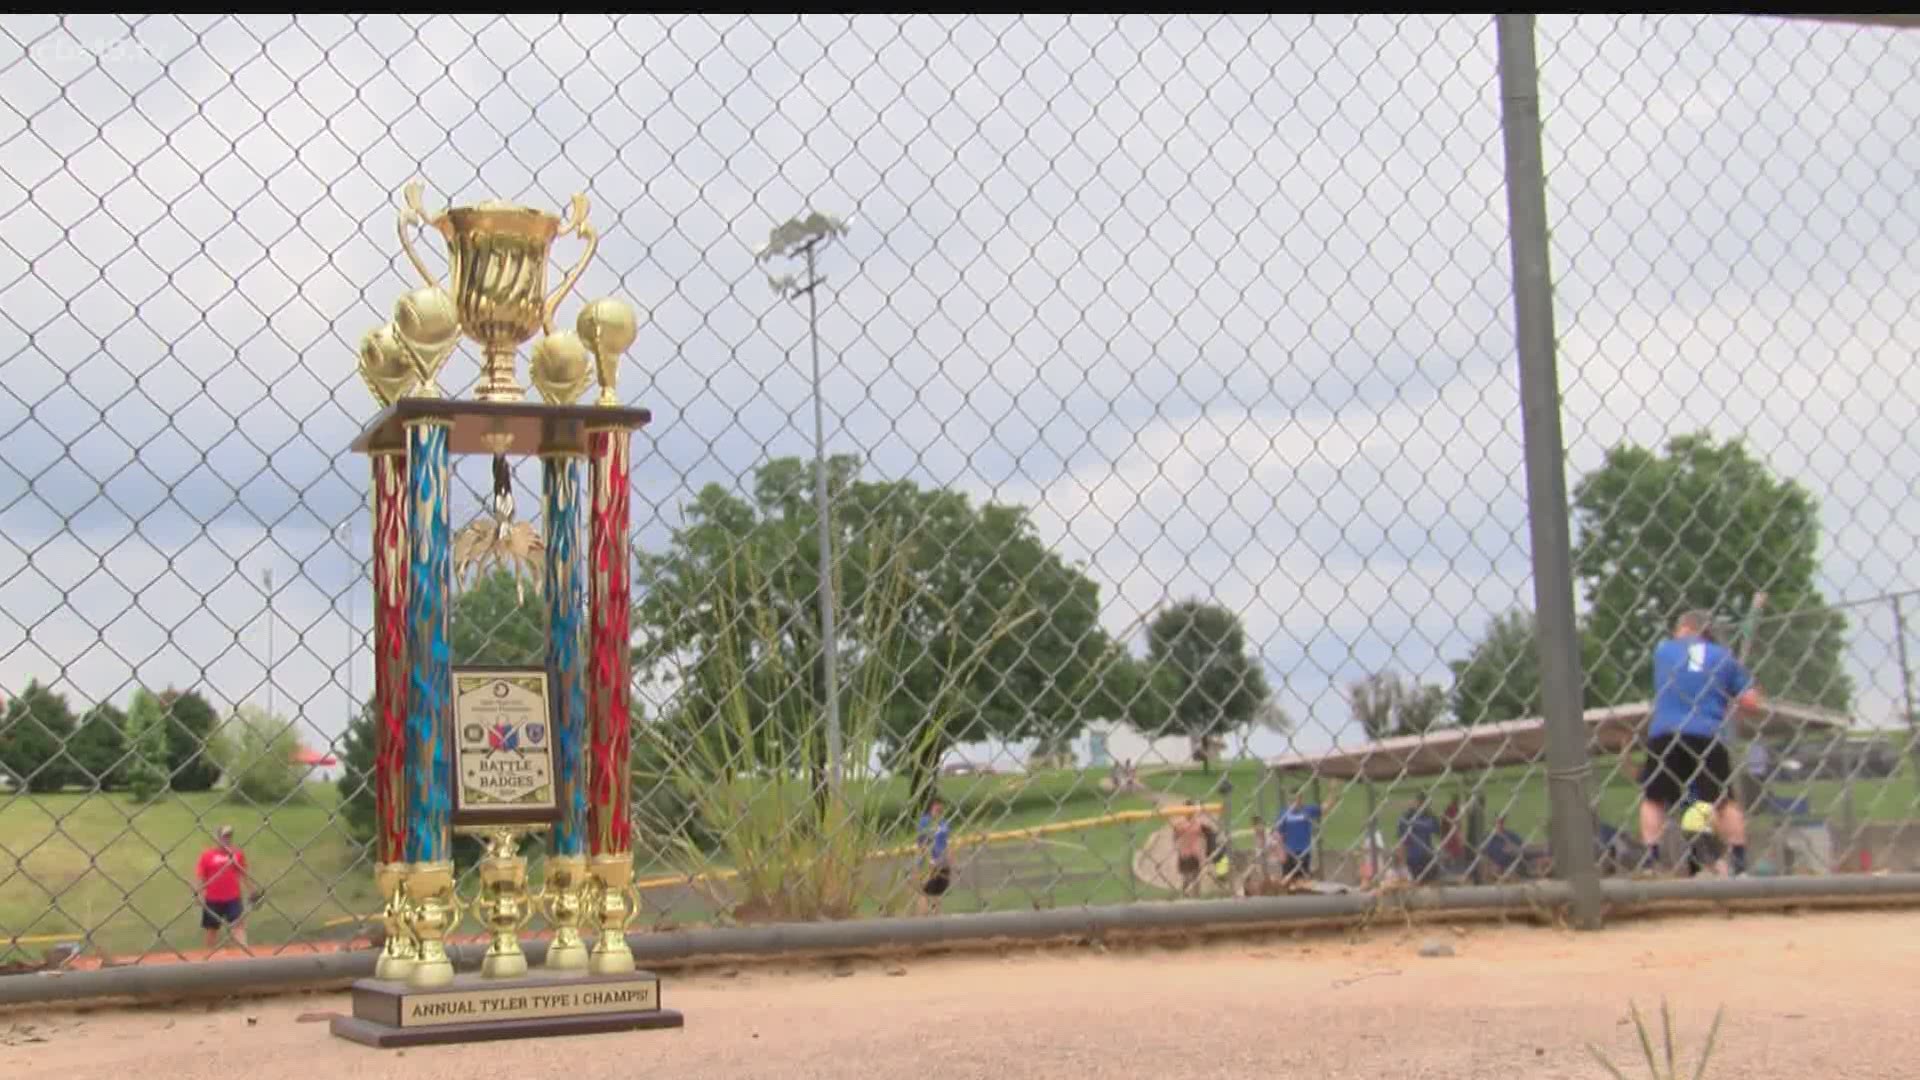 Balls were flying out of the batters box Saturday afternoon as the Tyler Police Department squared off with the Tyler Fire Department in their annual softball game.